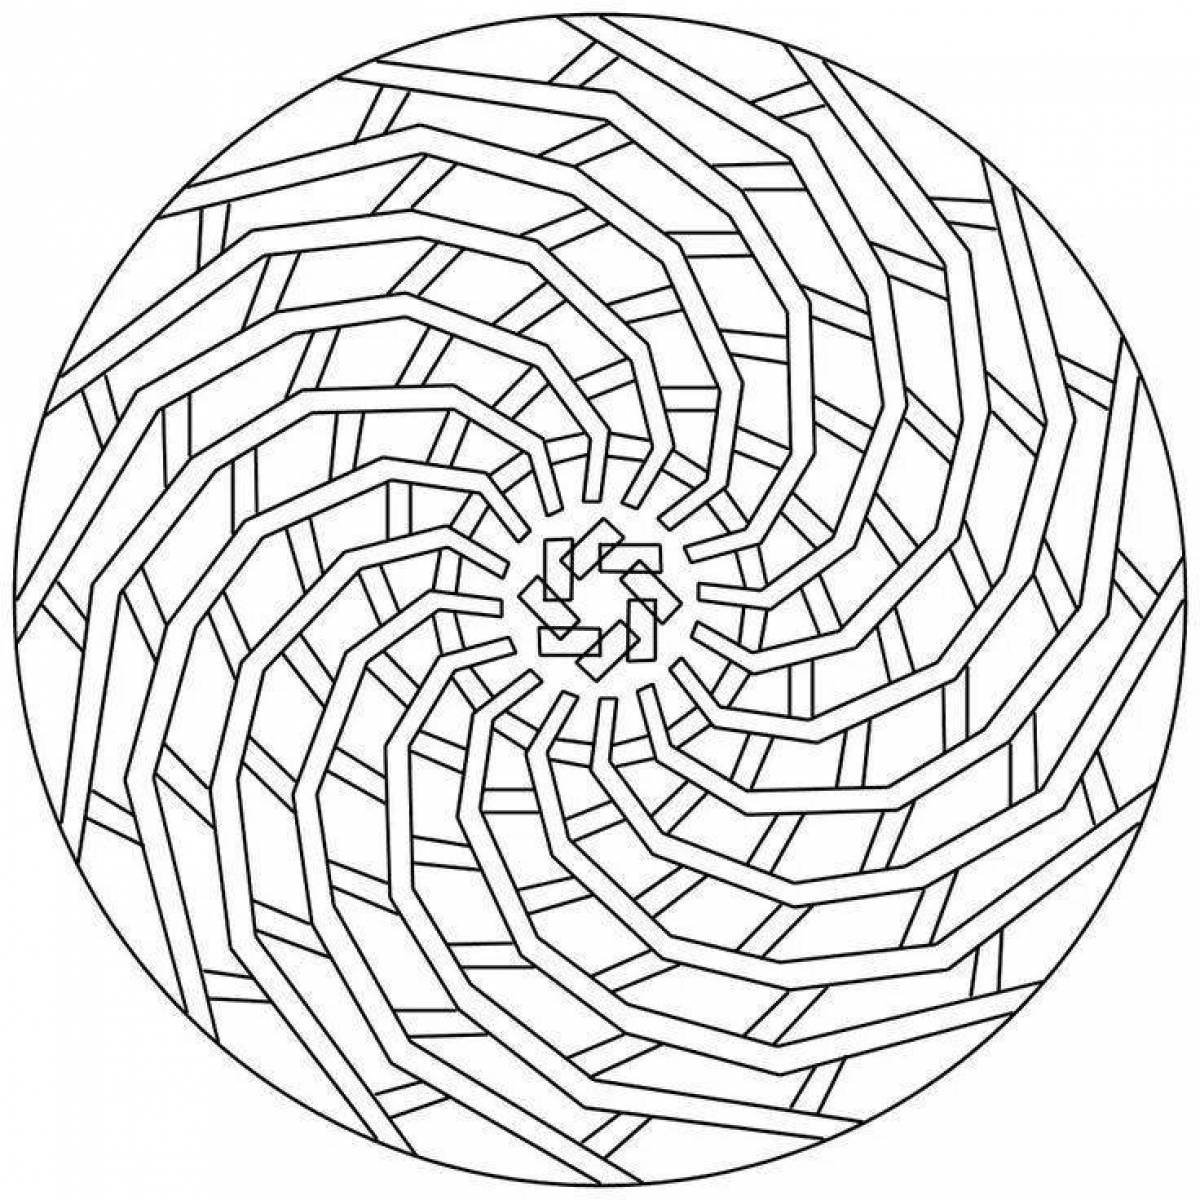 Colouring page with amazing circle pattern